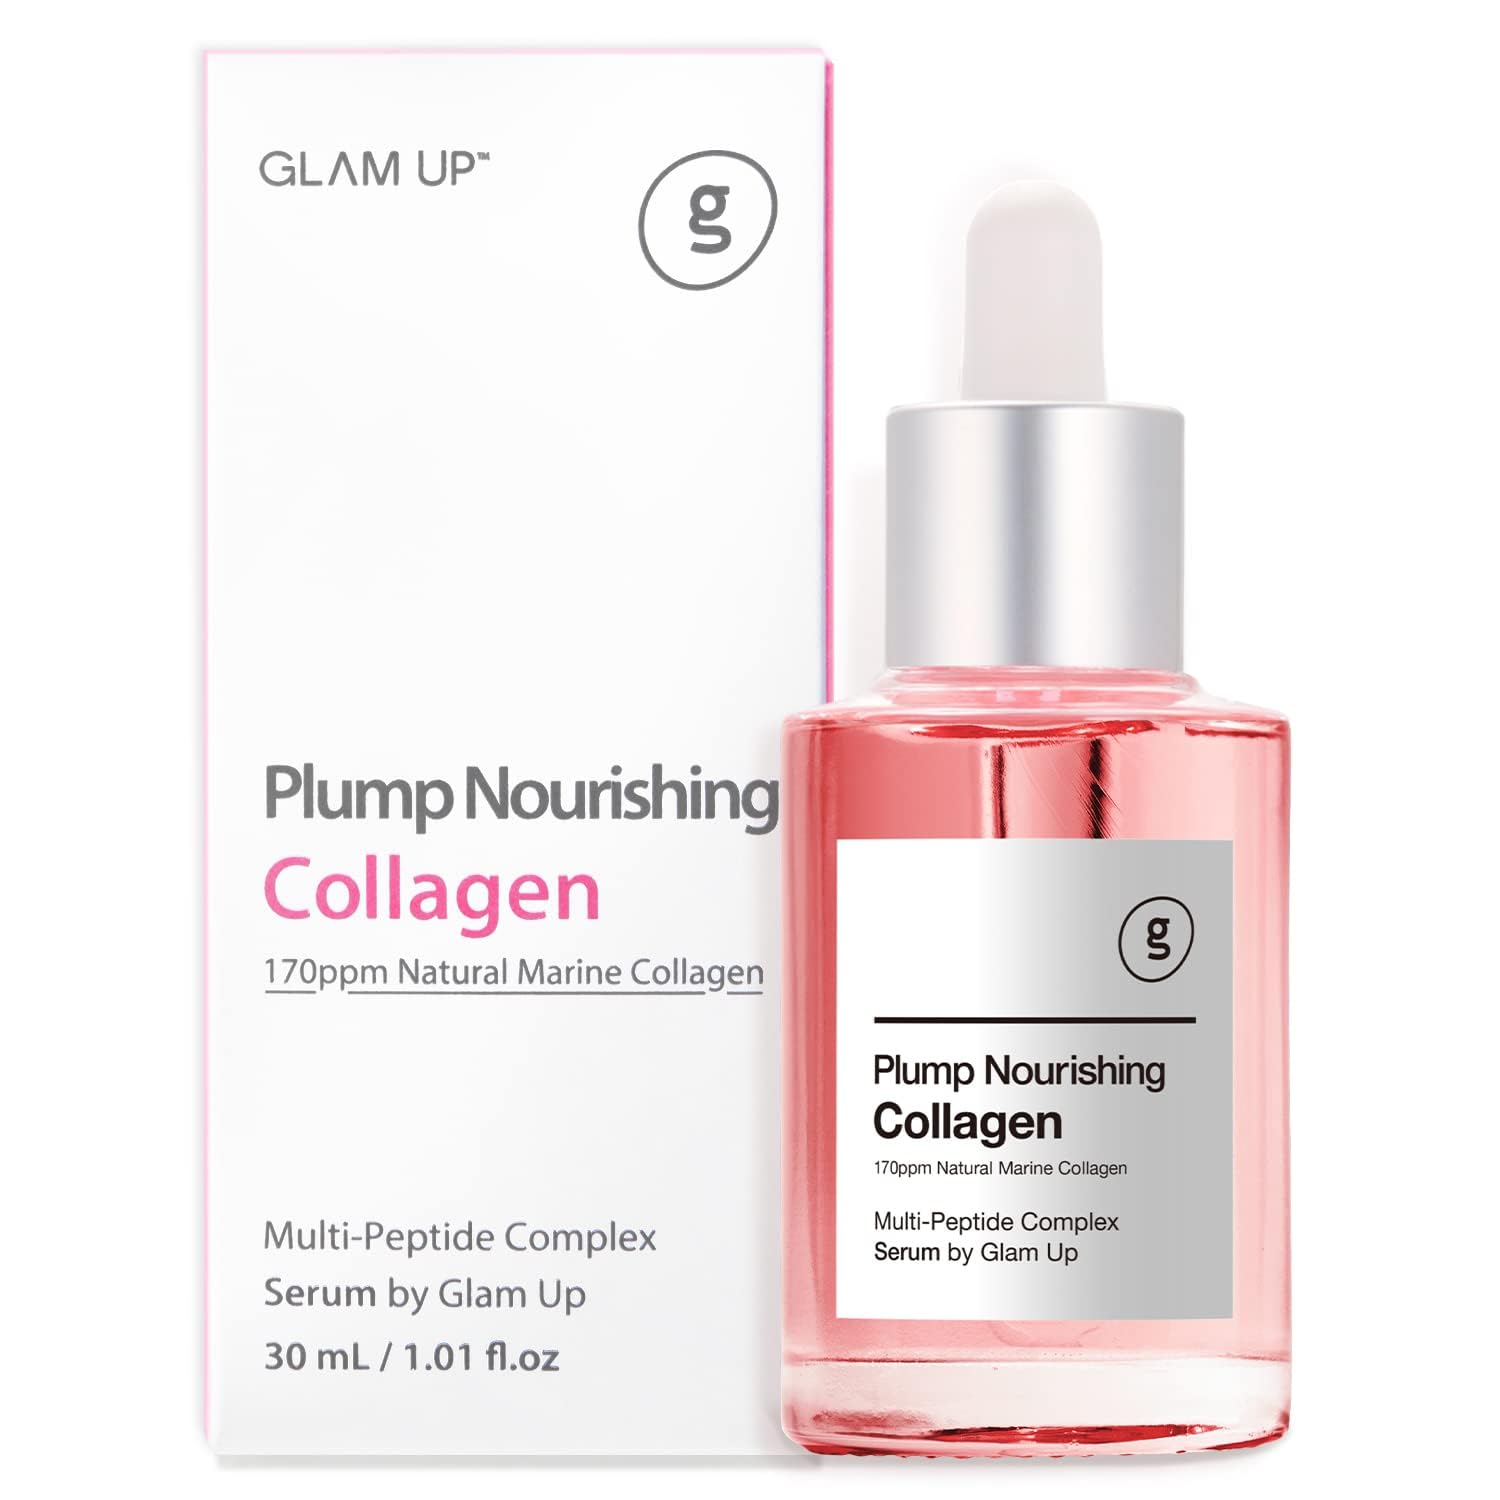 GLAM UP Plump Nourishing Real Collagen Serum - Anti Aging with Hyaluronic Acid, Lifting and Tightening Skincare, Reduce Fine Lines & Repair Skin with Peptide Complex Facial Serum (1.01 Fl Oz)